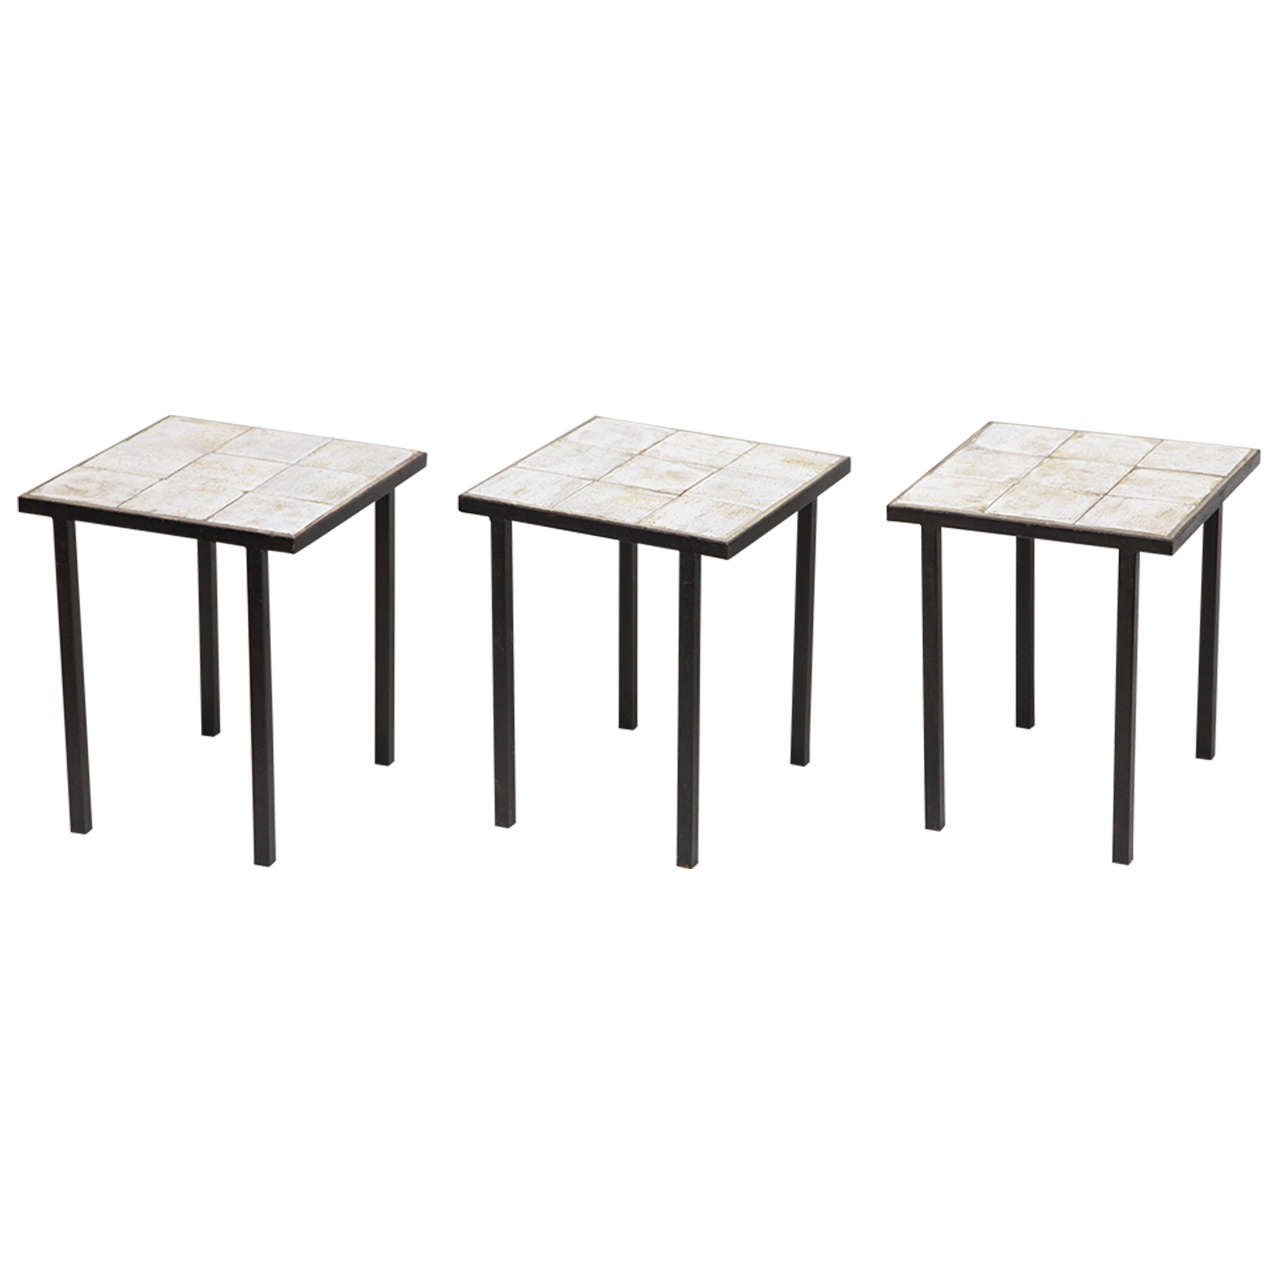 Set of Three French 1960's Wrought-Iron and Ceramic Tile Tables